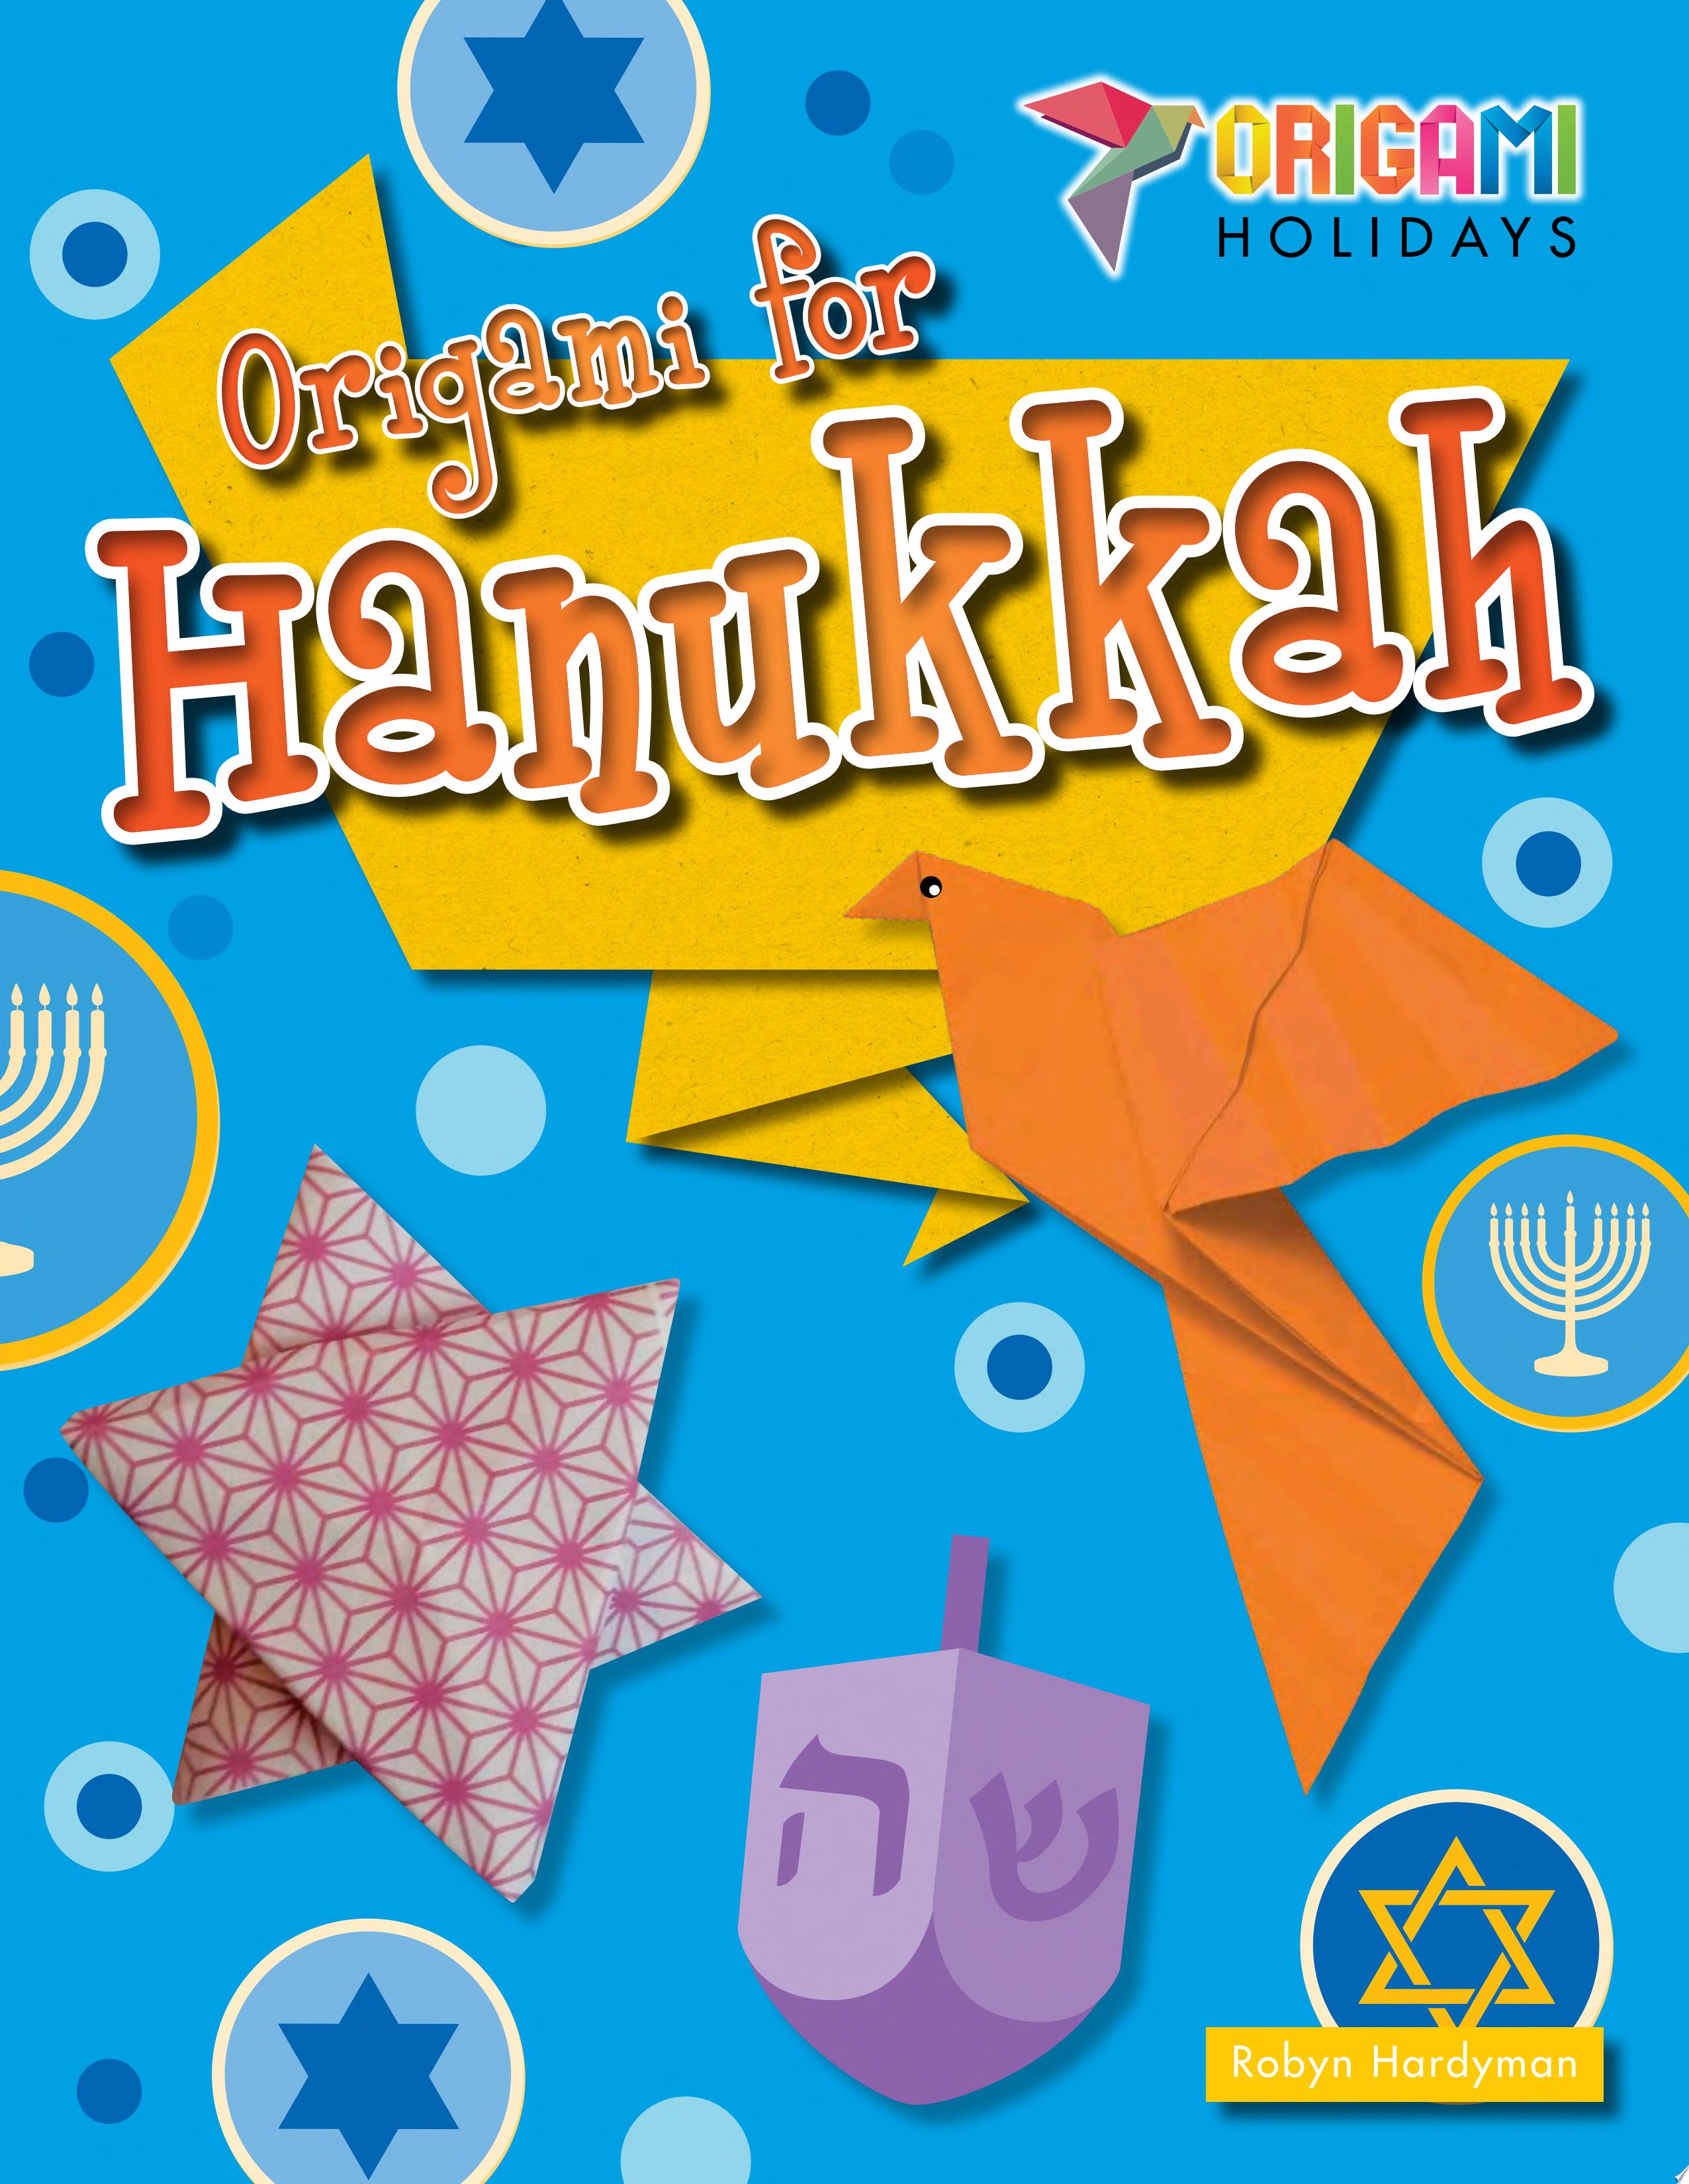 Image for "Origami for Hanukkah"